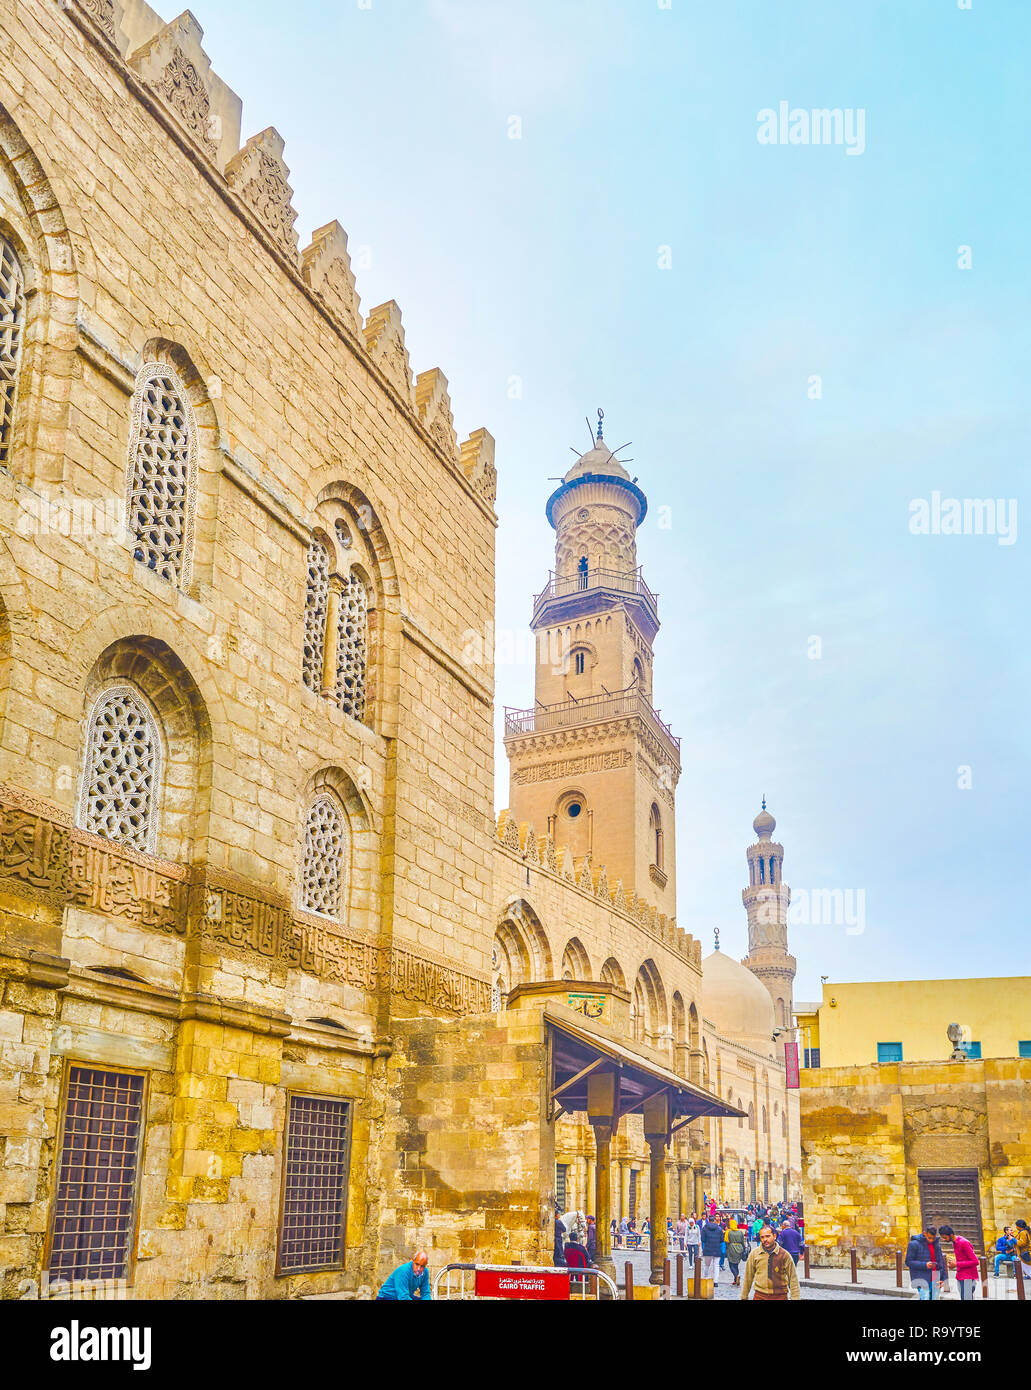 CAIRO, EGYPT - DECEMBER 20, 2017: The Al-Muizz is one of the oldest streets in Cairo with the biggest amount of historical landmarks, on December 20 i Stock Photo